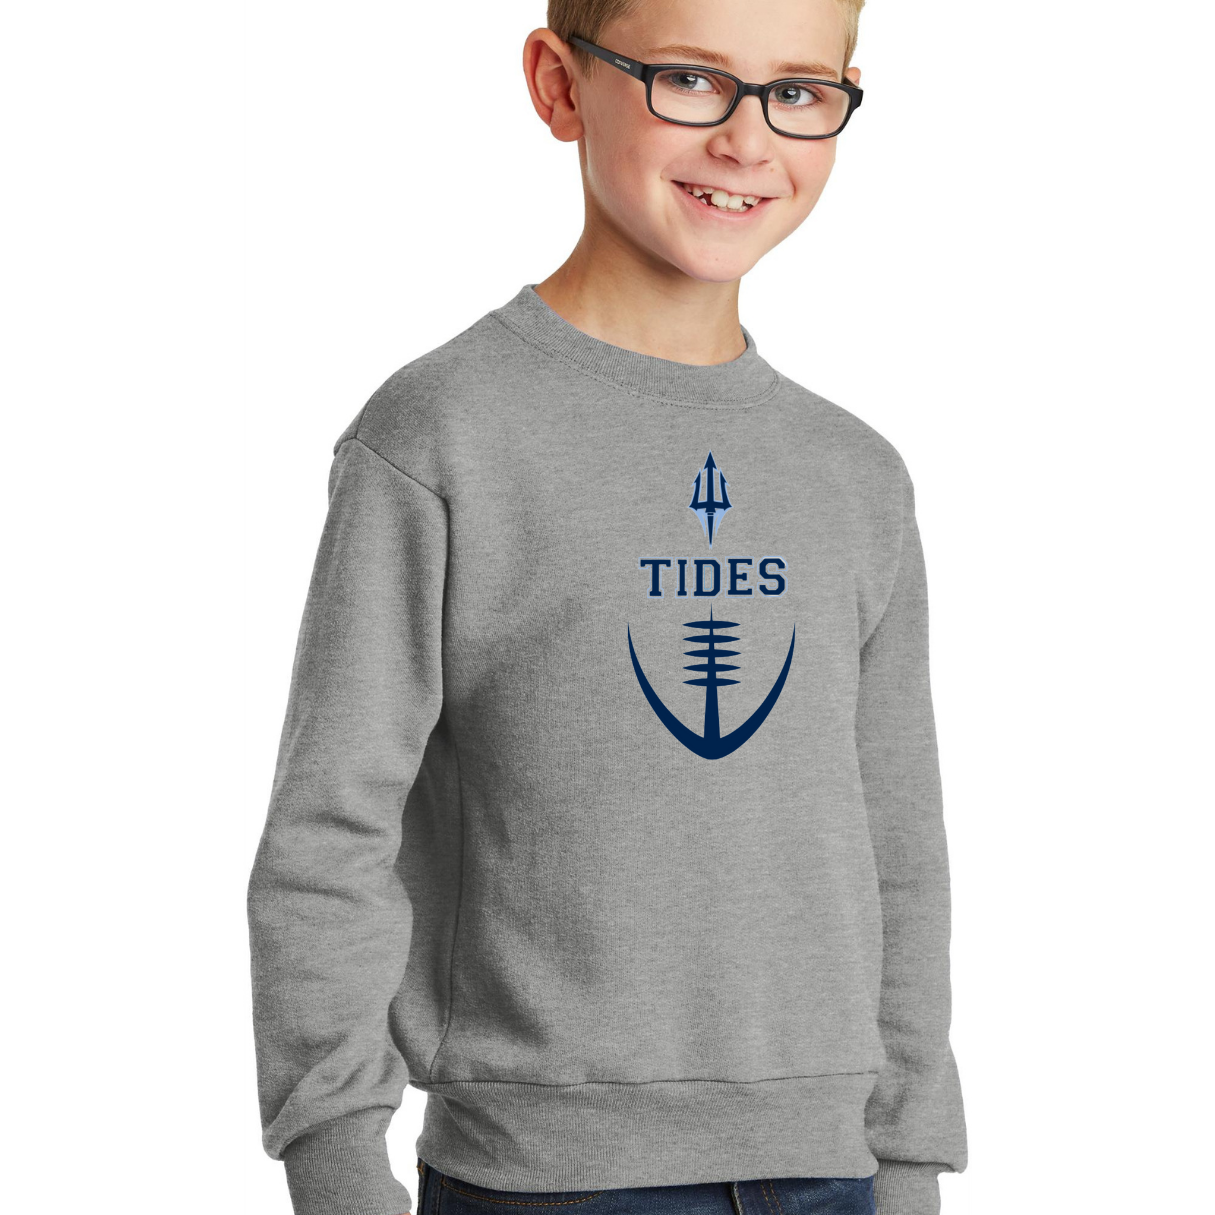 Tides Football Trident Crewneck - Adult and Youth